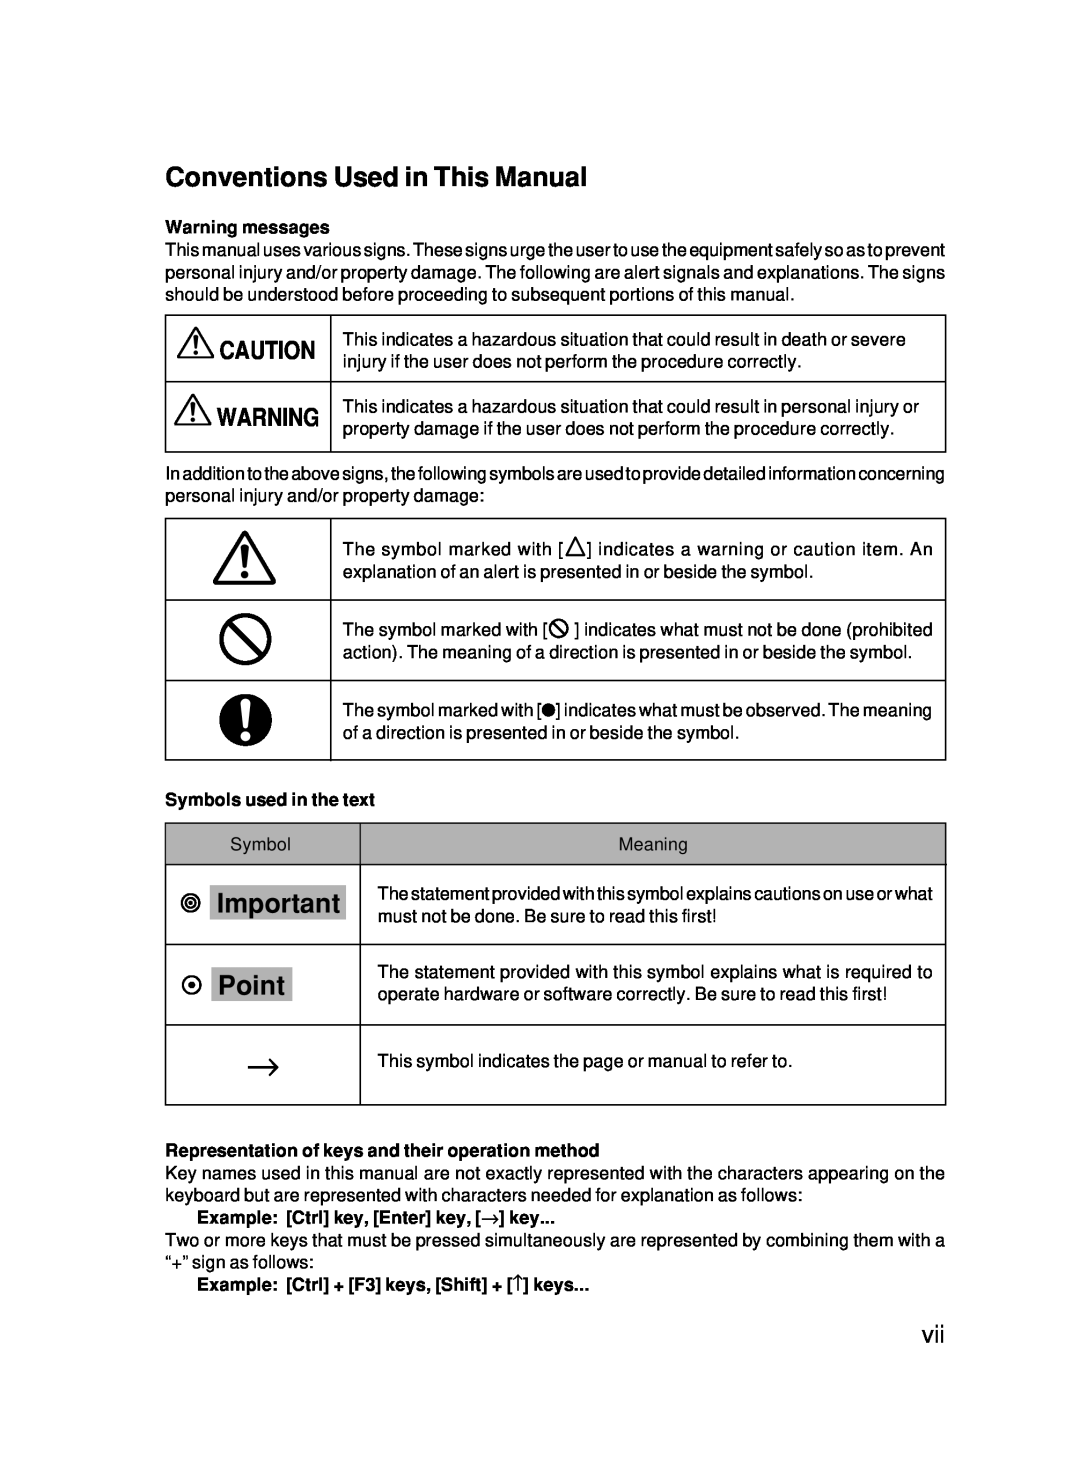 Fujitsu 5000 user manual Conventions Used in This Manual, Point, Warning messages, Symbols used in the text 